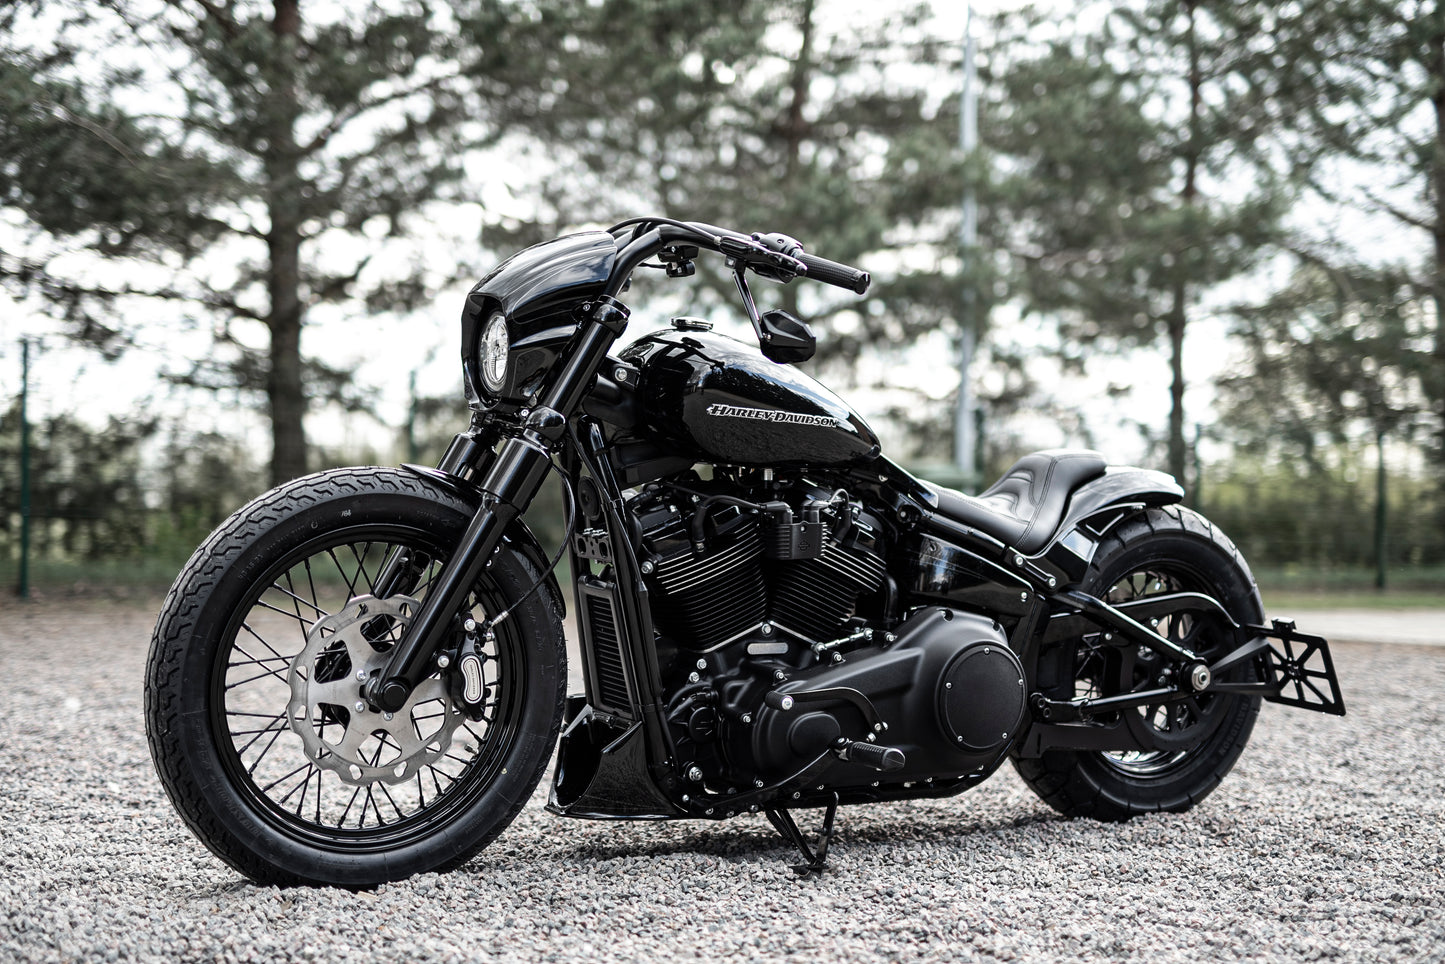 Harley Davidson motorcycle with Killer Custom front fork lowering kit from the side in a nature environment